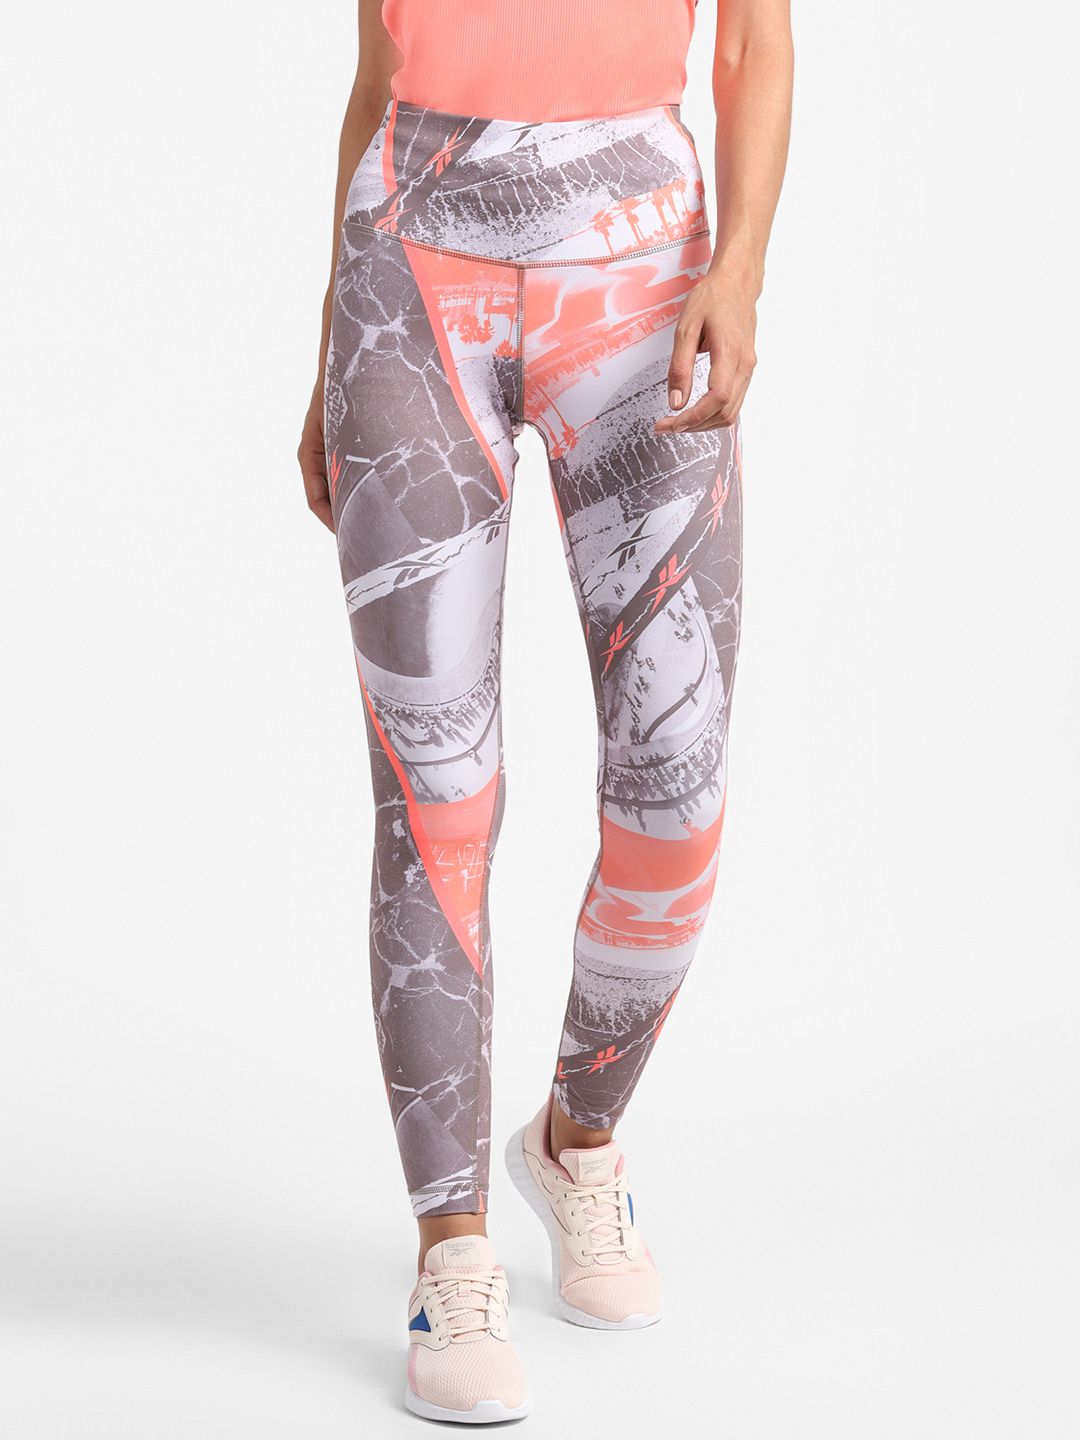 Reebok Women Peach-Coloured & Mauve All Over Print Sustainable Workout Tights Price in India